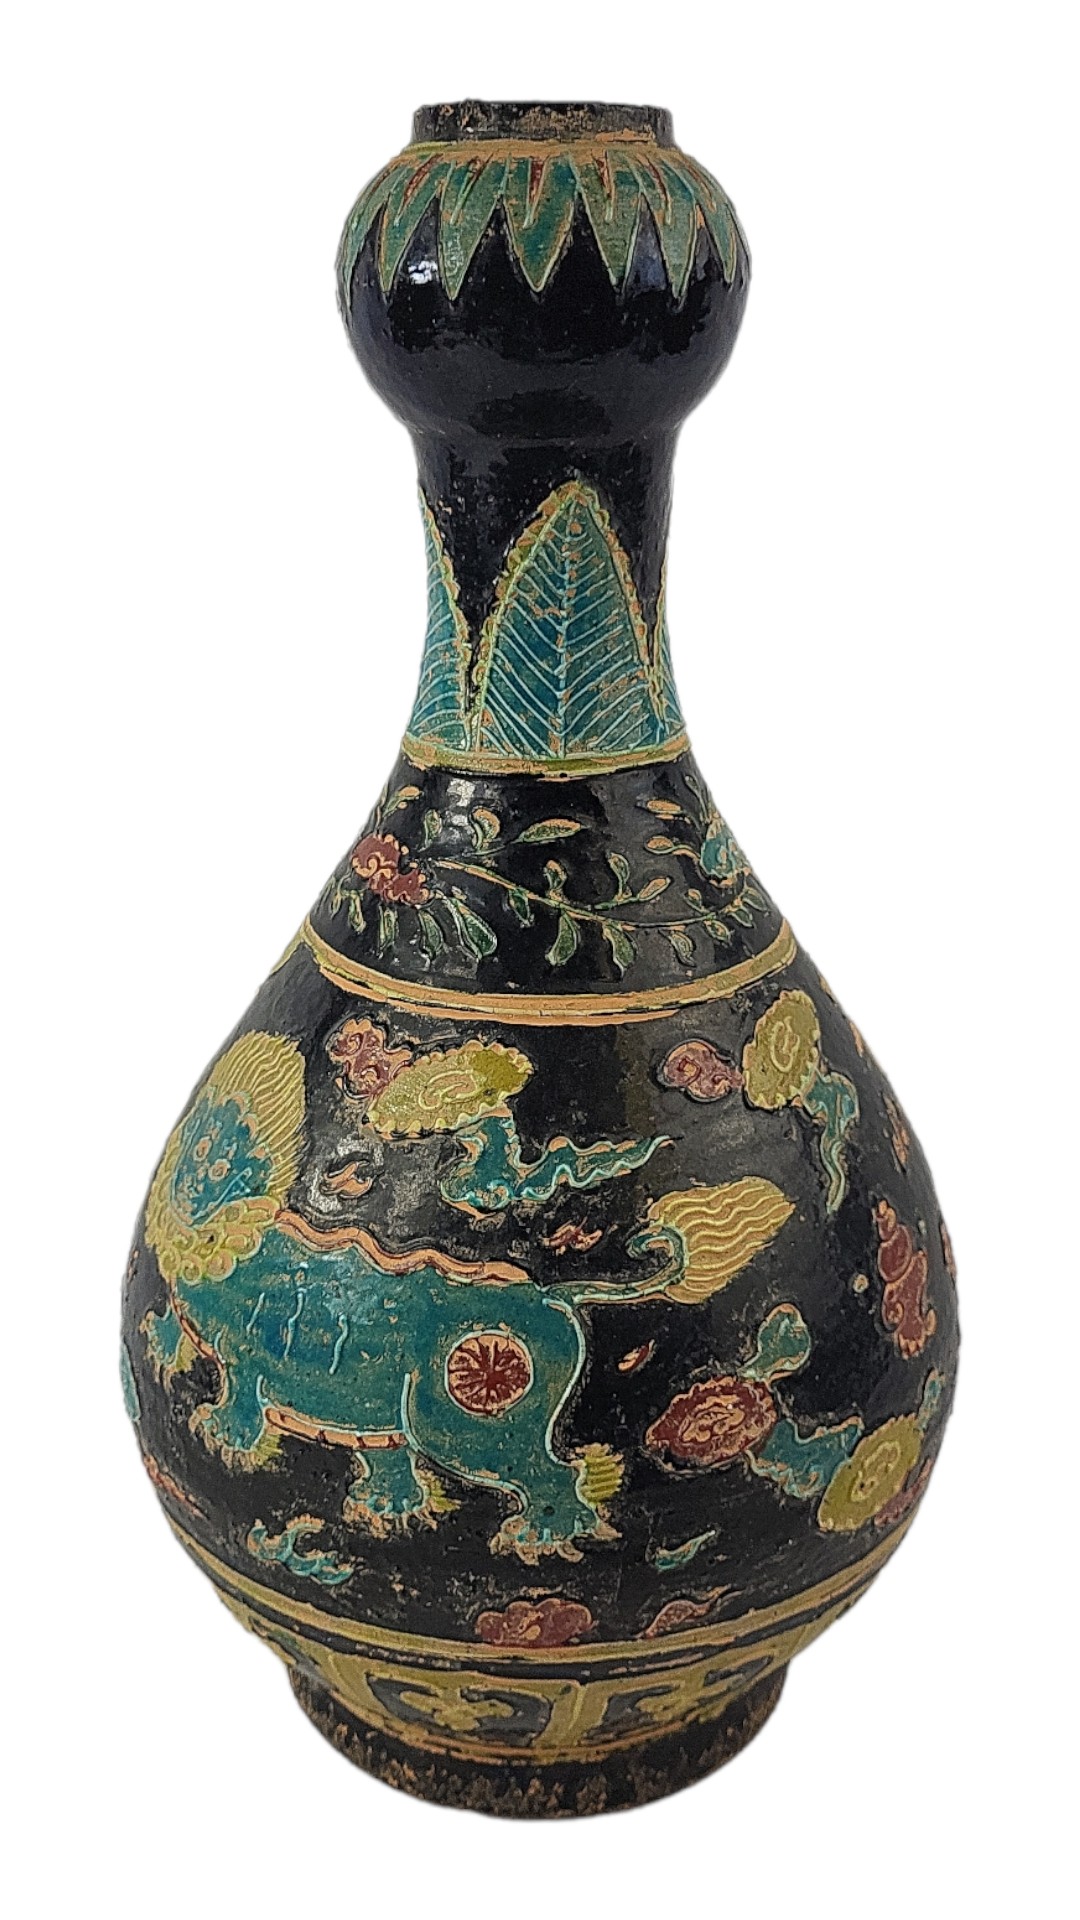 AN ANTIQUE CHINESE TERRACOTTA GARLIC NECK VASE With chinoiserie decoration on black ground. (h 37cm) - Image 2 of 3